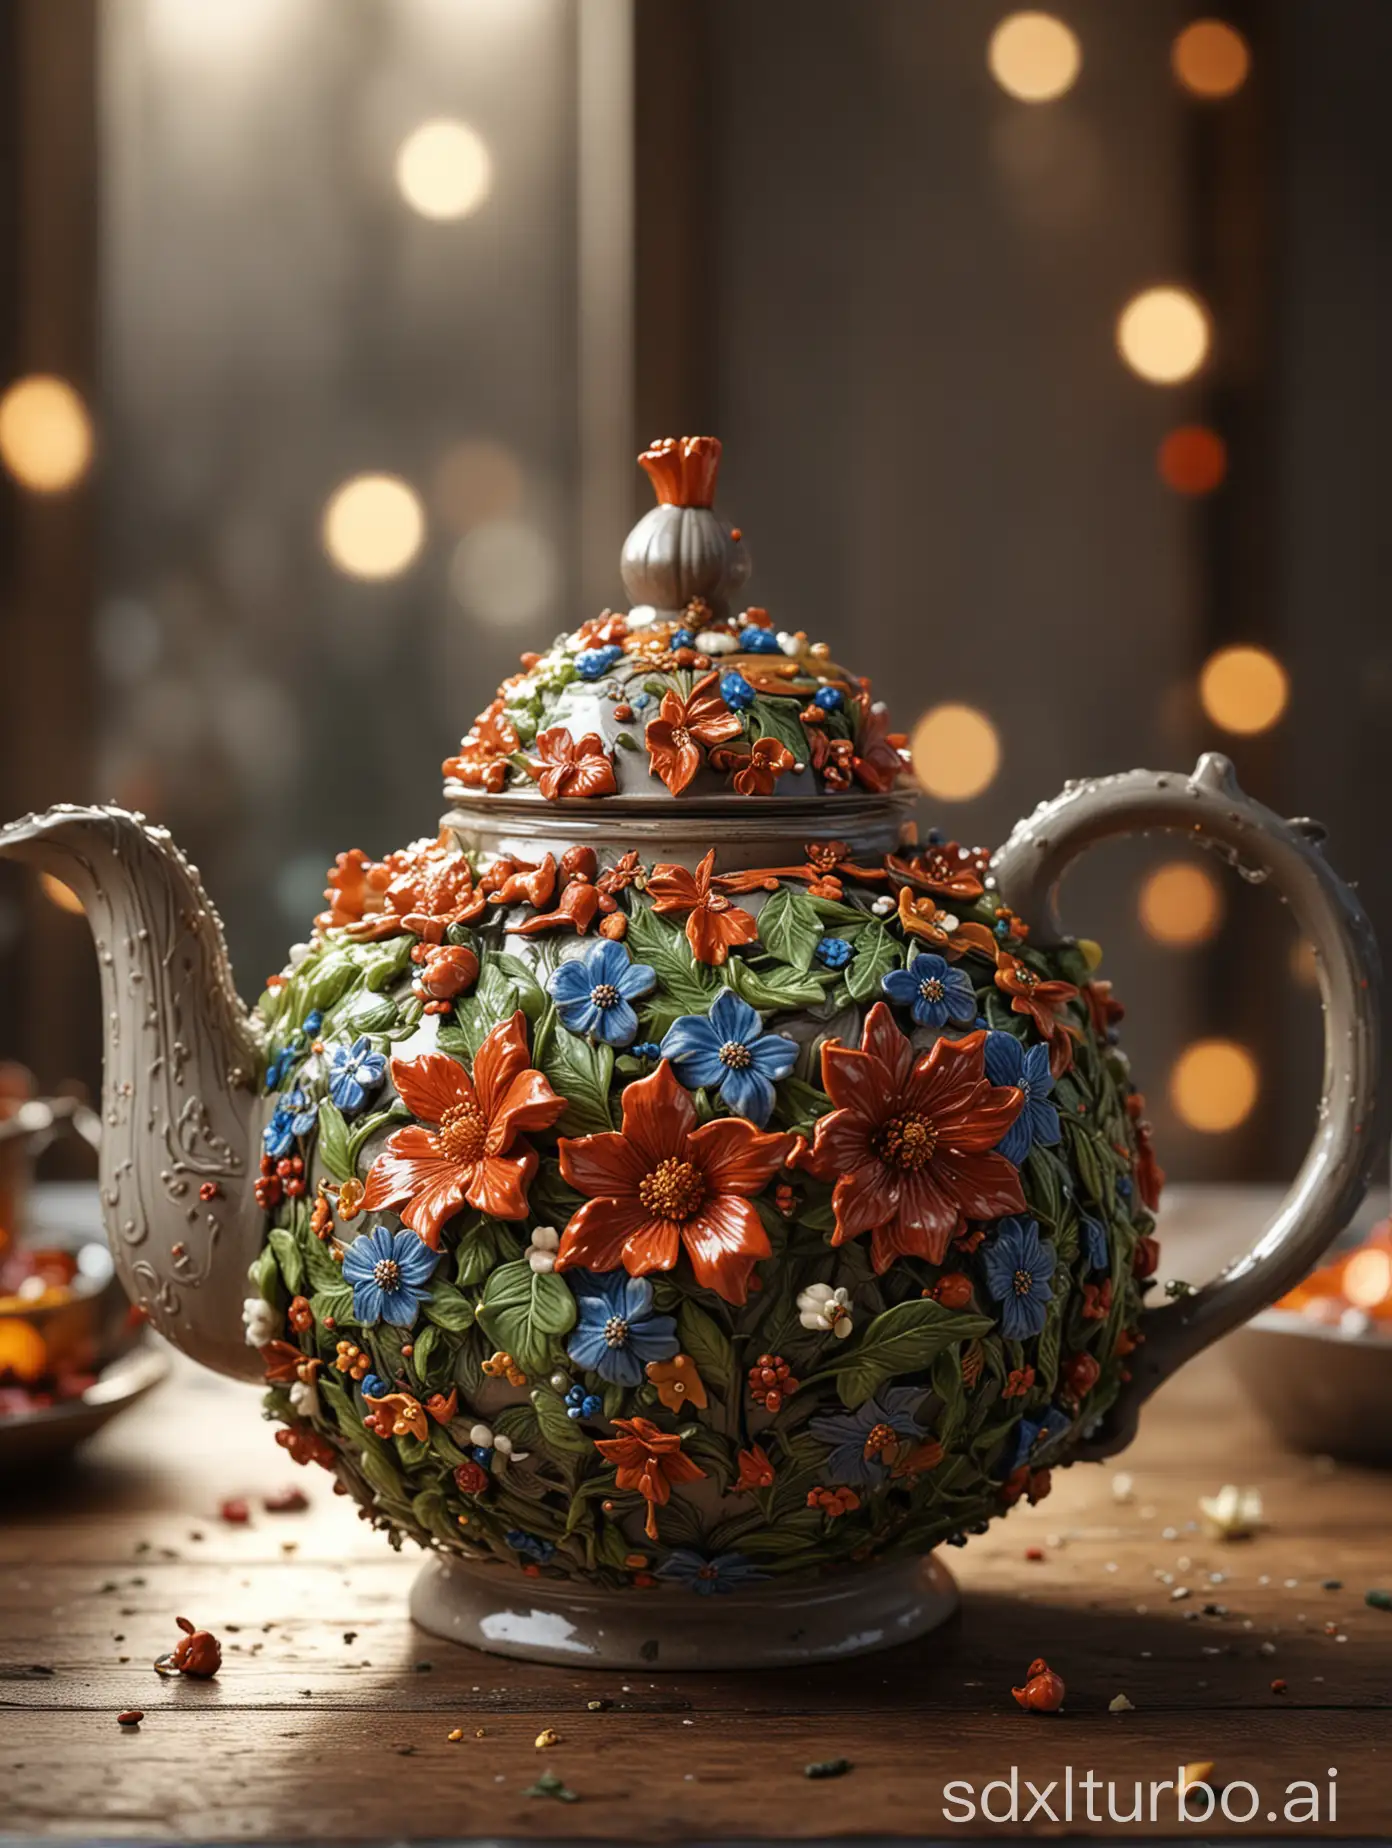 Extravagant ceramic spring flowers teapot design : Insanely detailed photograph of a ceramic teapot with 3D Flowers : surreal 3D design : meticulously detailed teapot : ultra high quality : rule of thirds : cinematic : HDR : 16k resolution : Epic composition : deep colors : fairy lights : intricate complexity : hyperdetailed : sharp focus : beautiful : sharp details : autumn leave : Professional photography, bokeh, natural lighting, canon lens, high contrast, high resolution, intricate details, HDR, beautifully shot, hyperrealistic, sharp focus, 64 megapixels, perfect composition